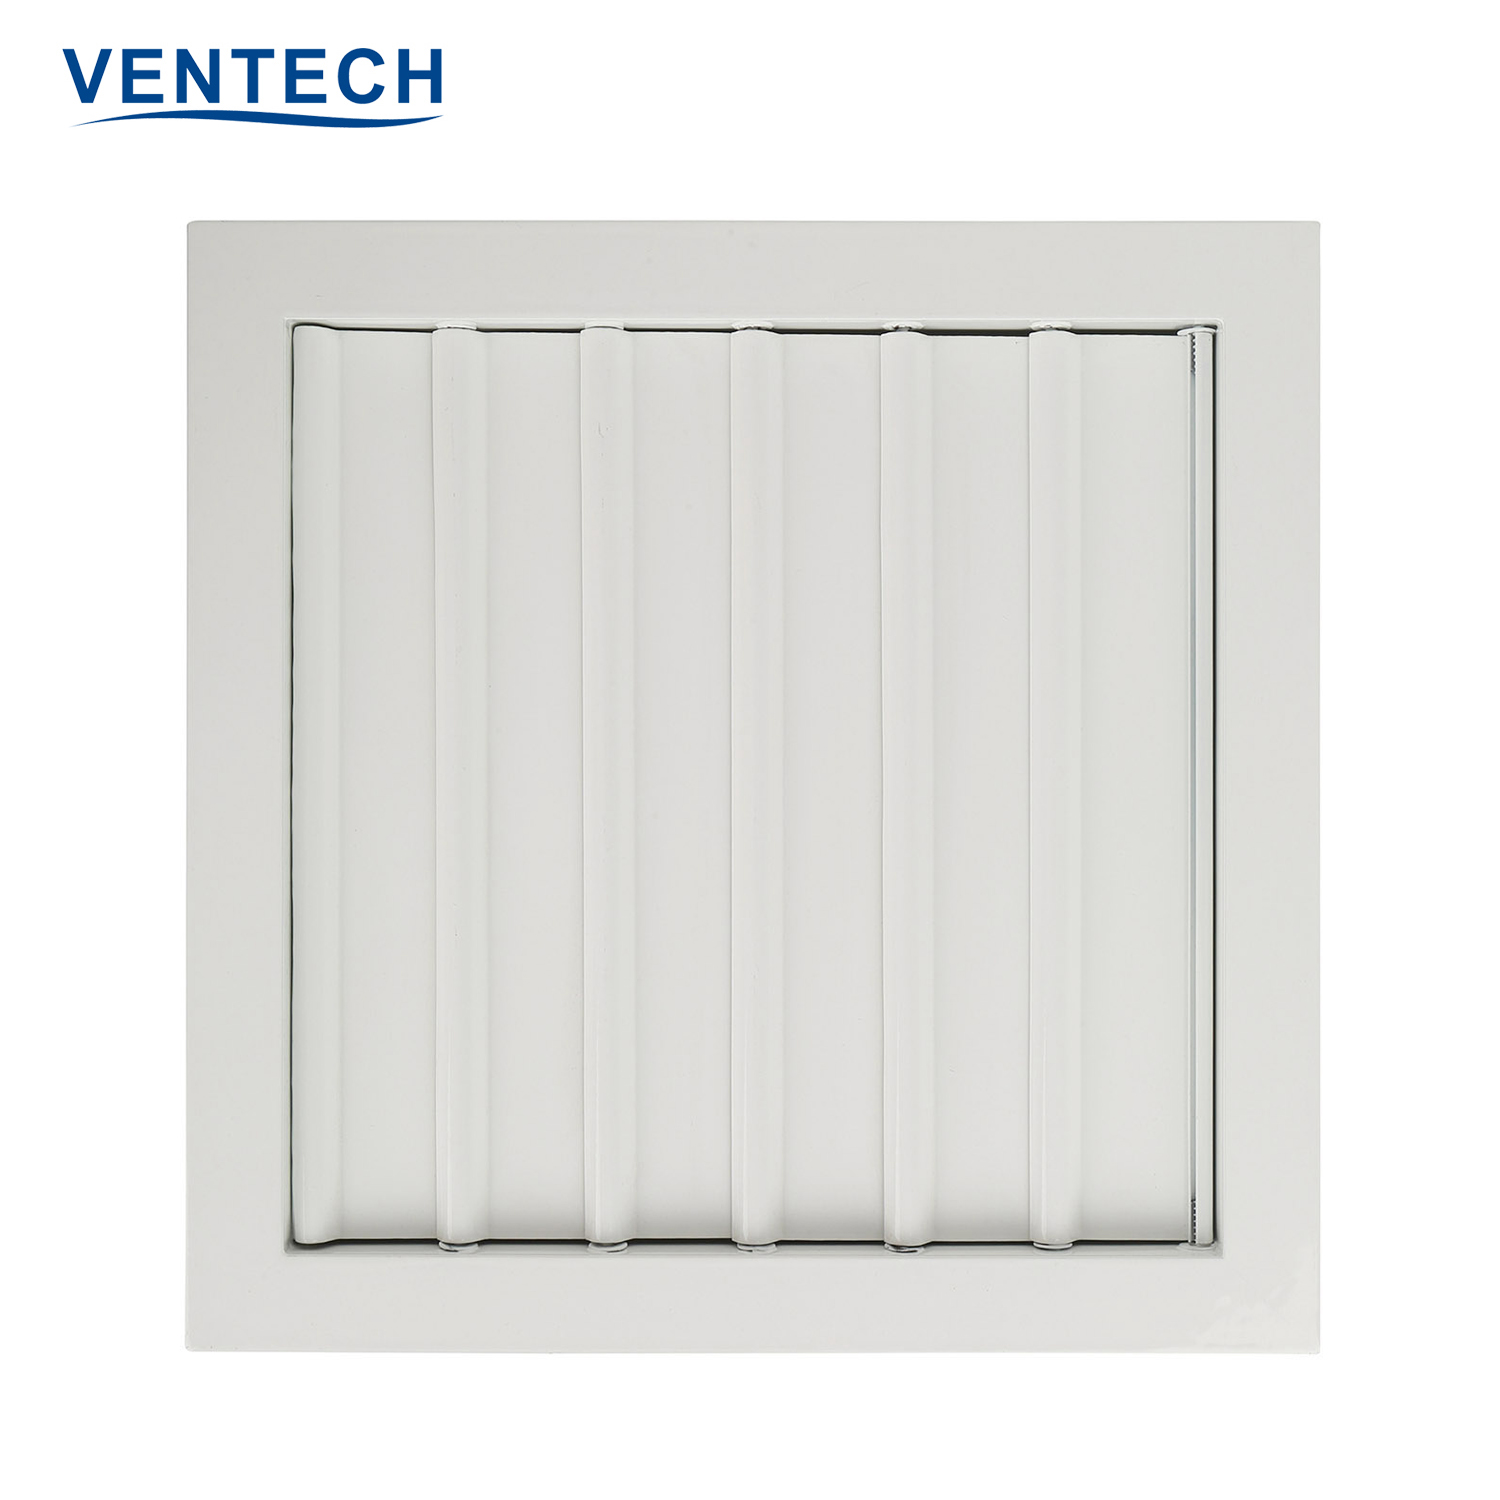 Ventech stainless steel louvers inquire now for large public areas-2